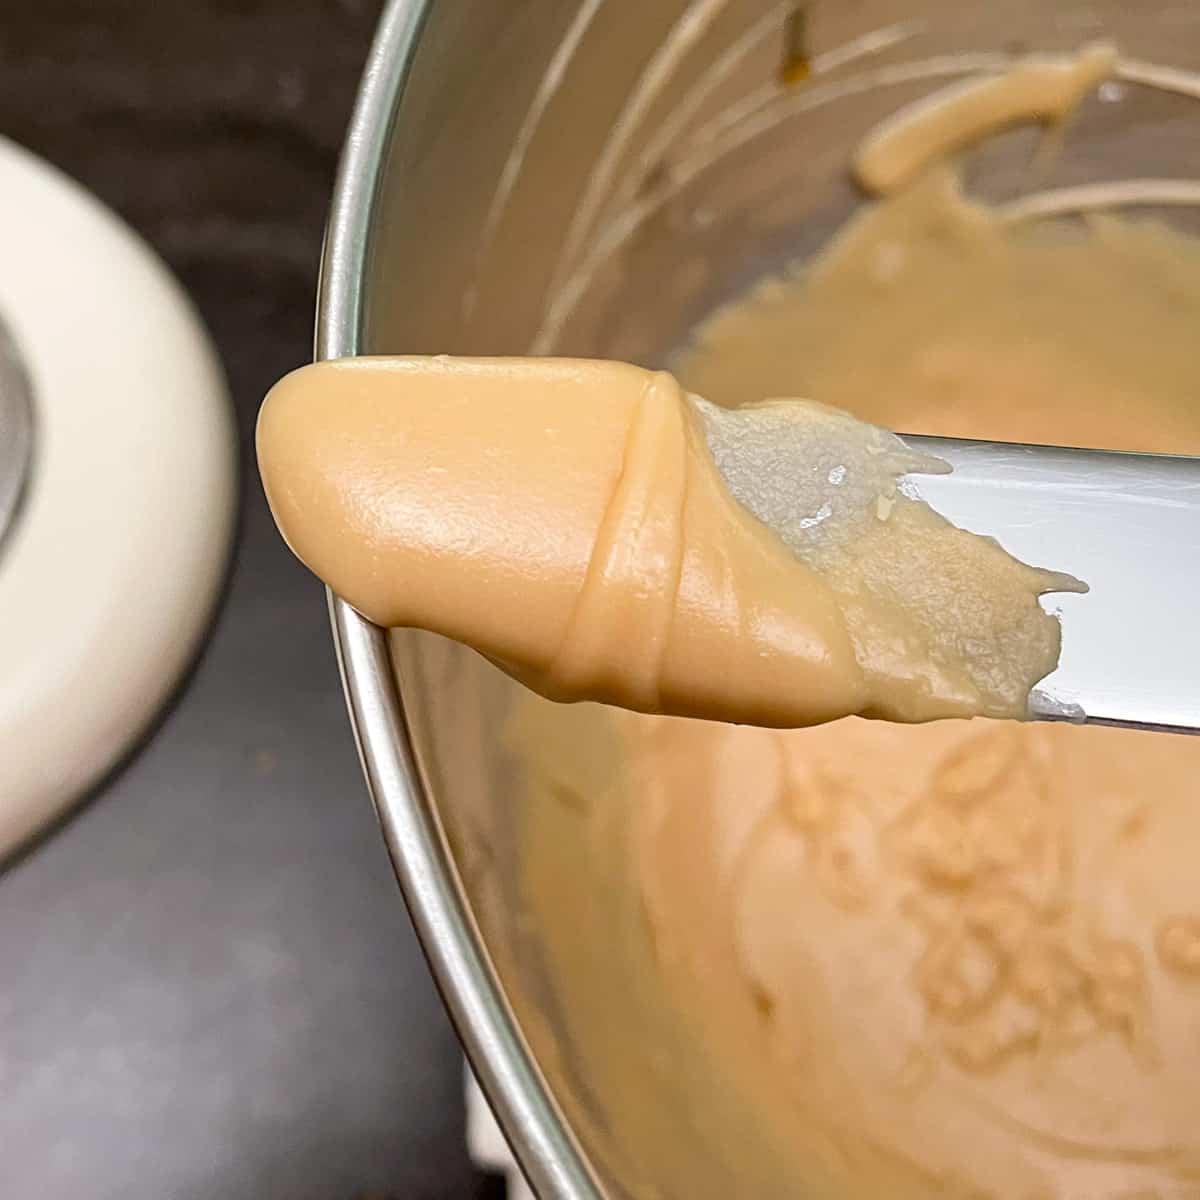 Clow up of brown sugar icing on the end of a knife.